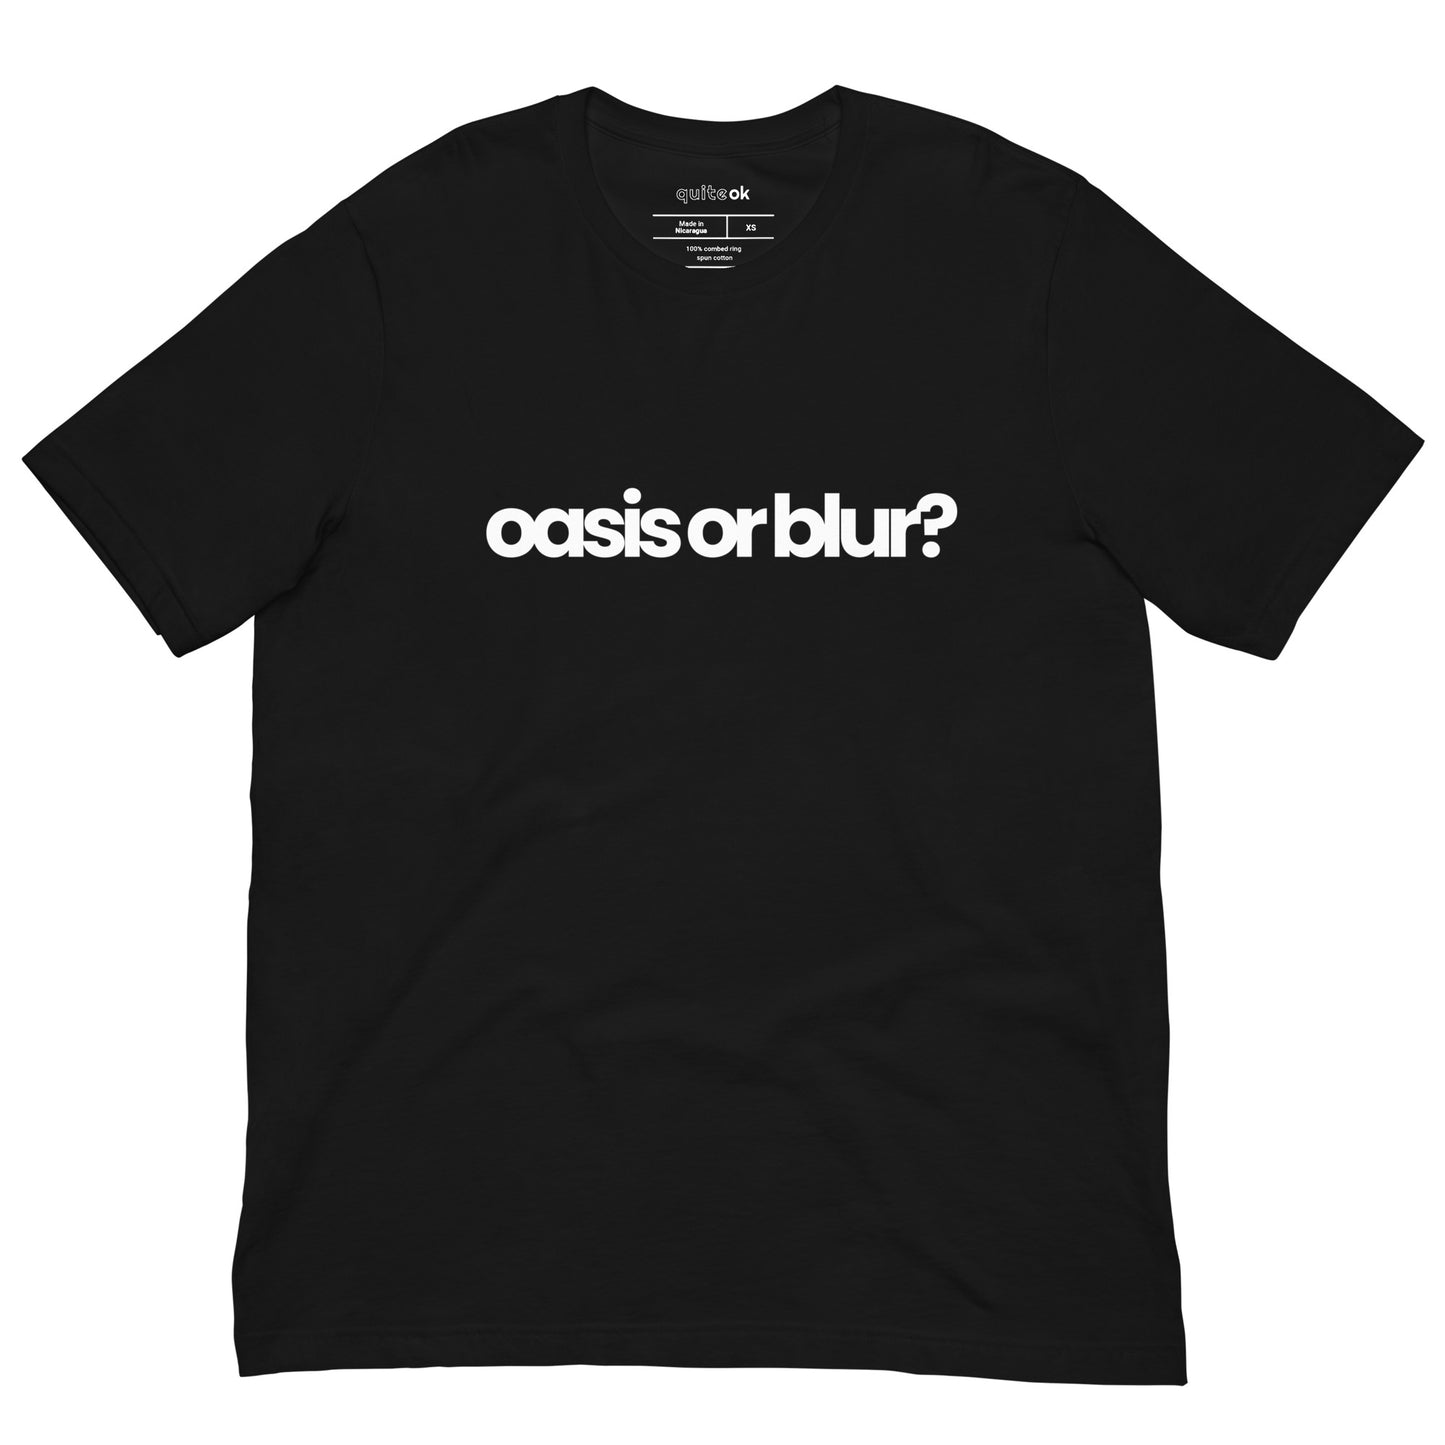 Oasis or Blur? Comedy Quote T-Shirt